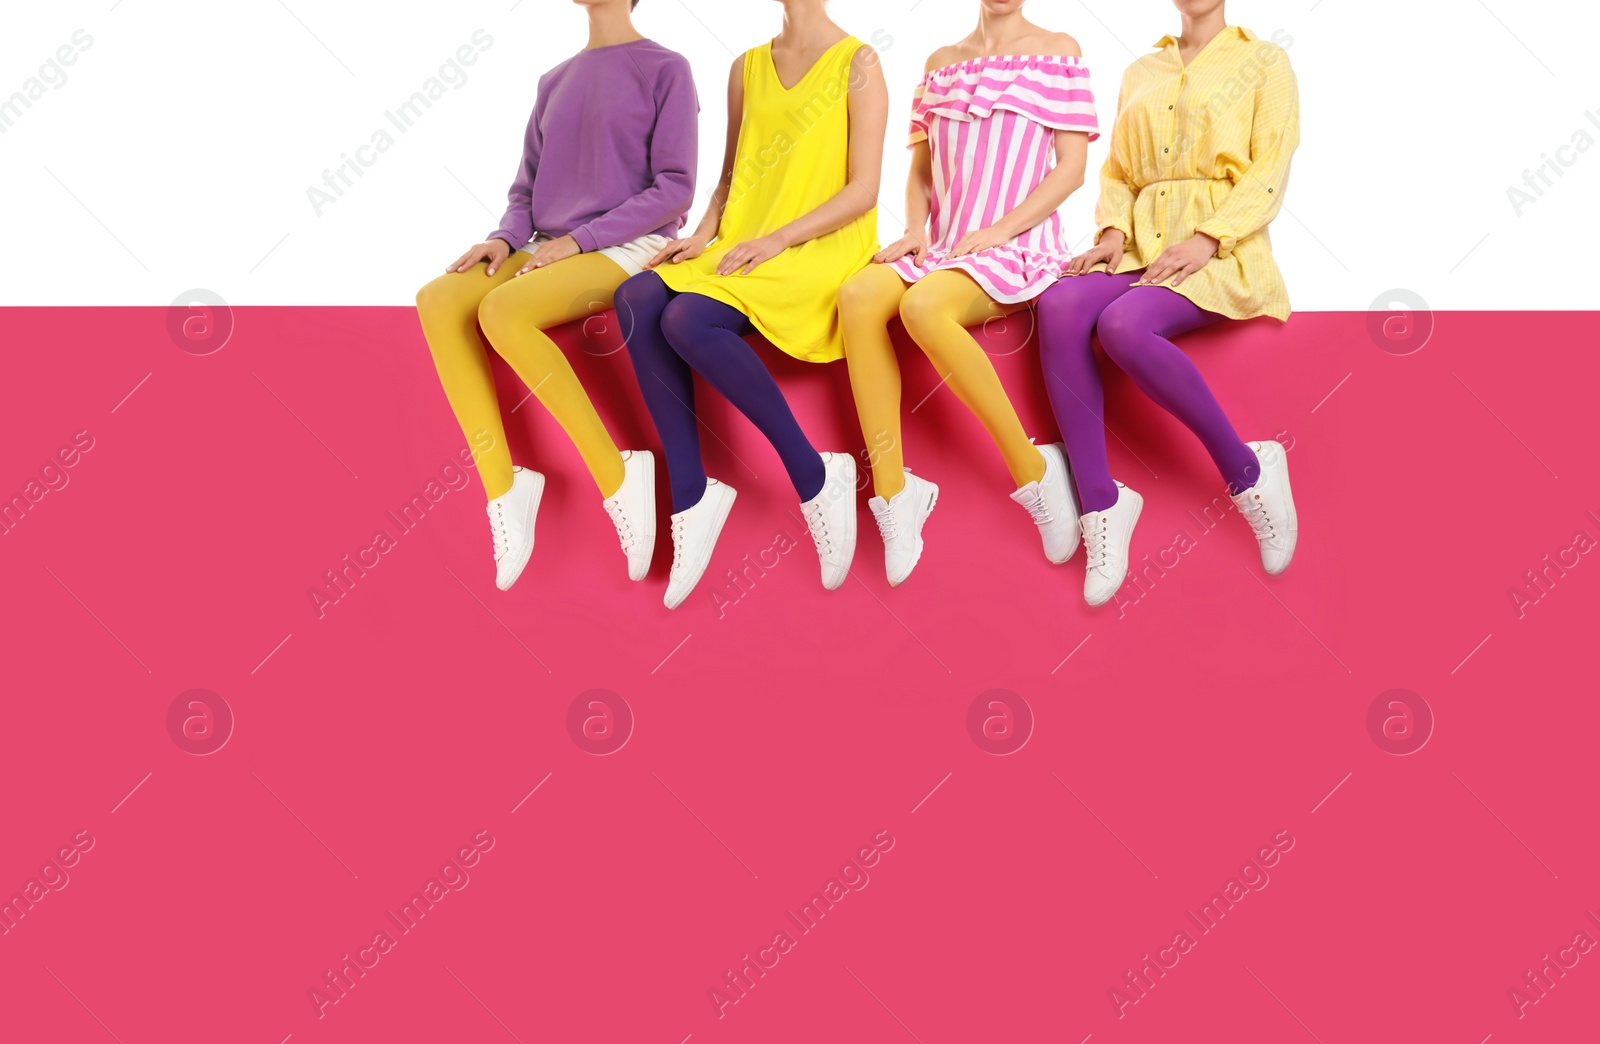 Photo of Group of women wearing bright tights and stylish shoes sitting on color background, closeup